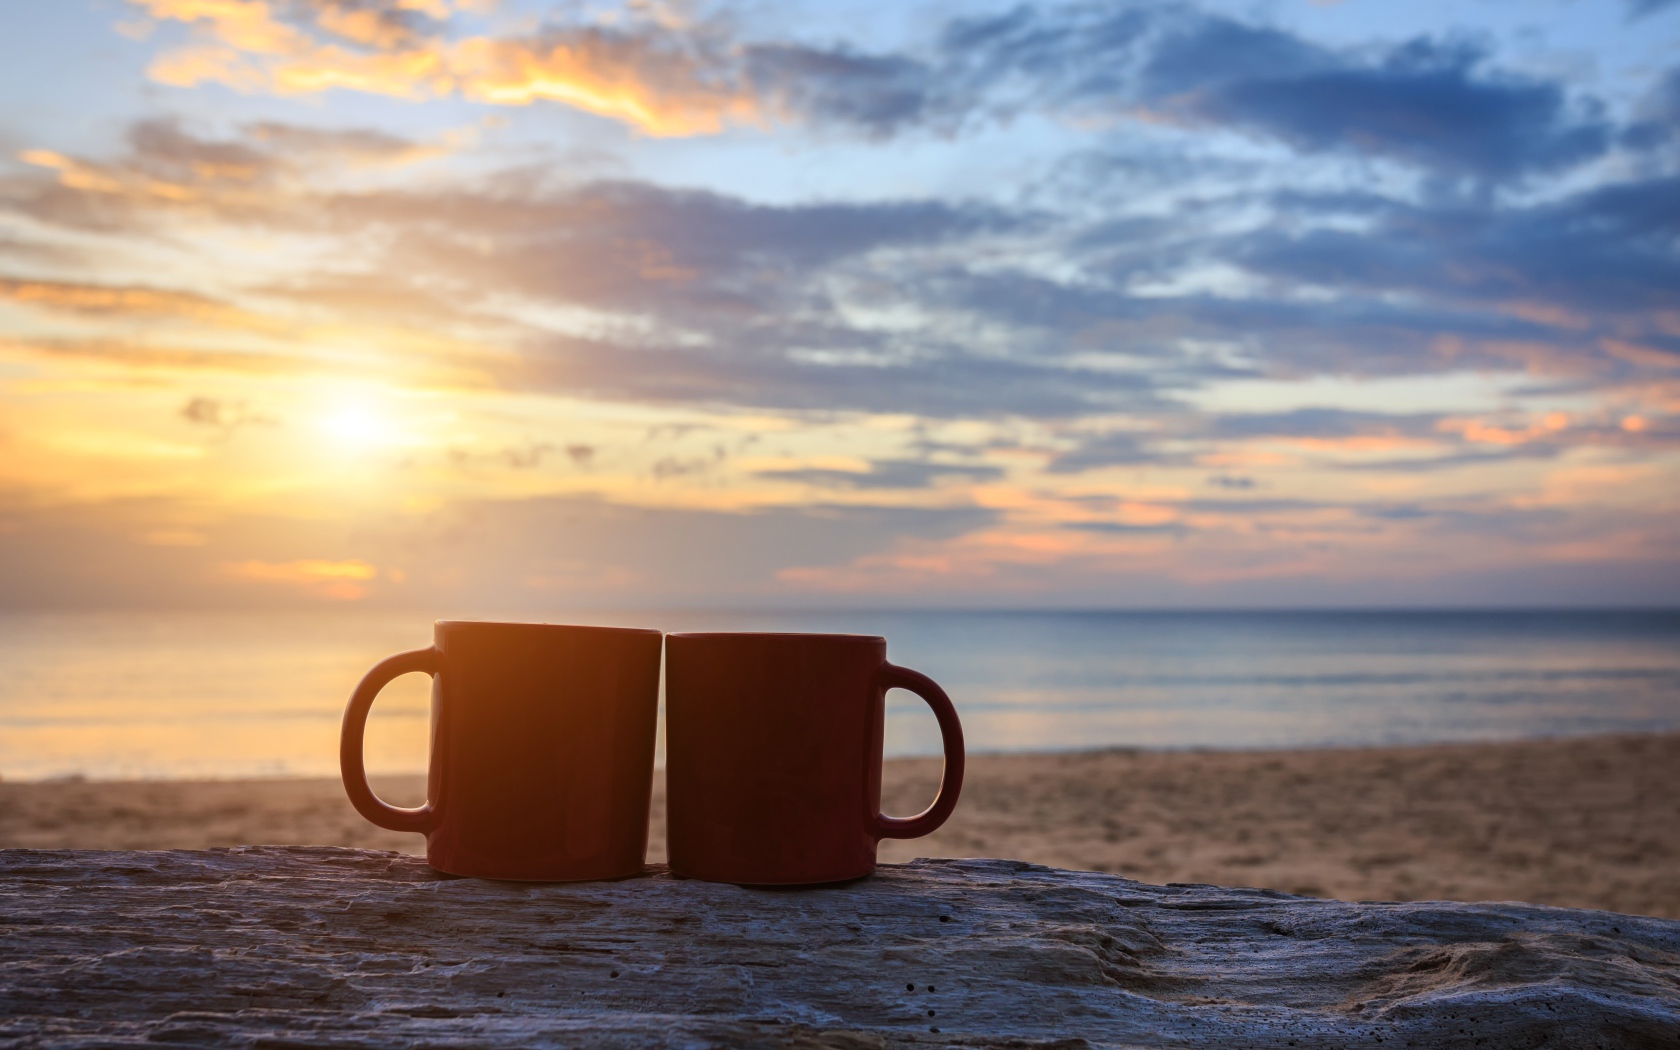 Two cups are standing on the sand against the background of dawn